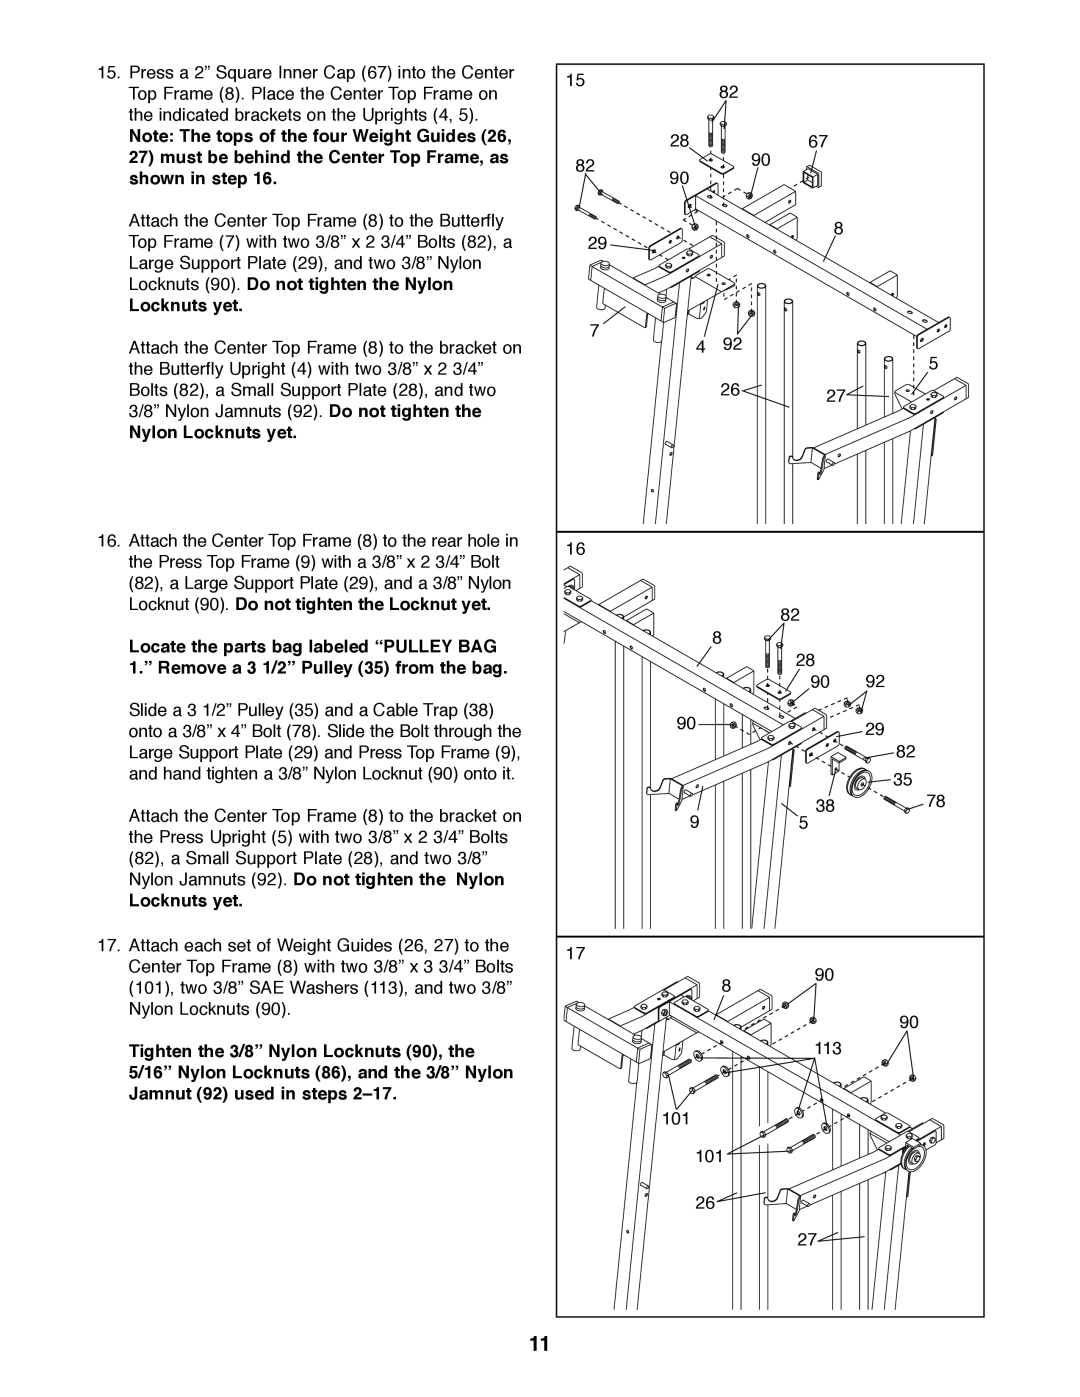 Weider 831.159830 user manual Note The tops of the four Weight Guides 